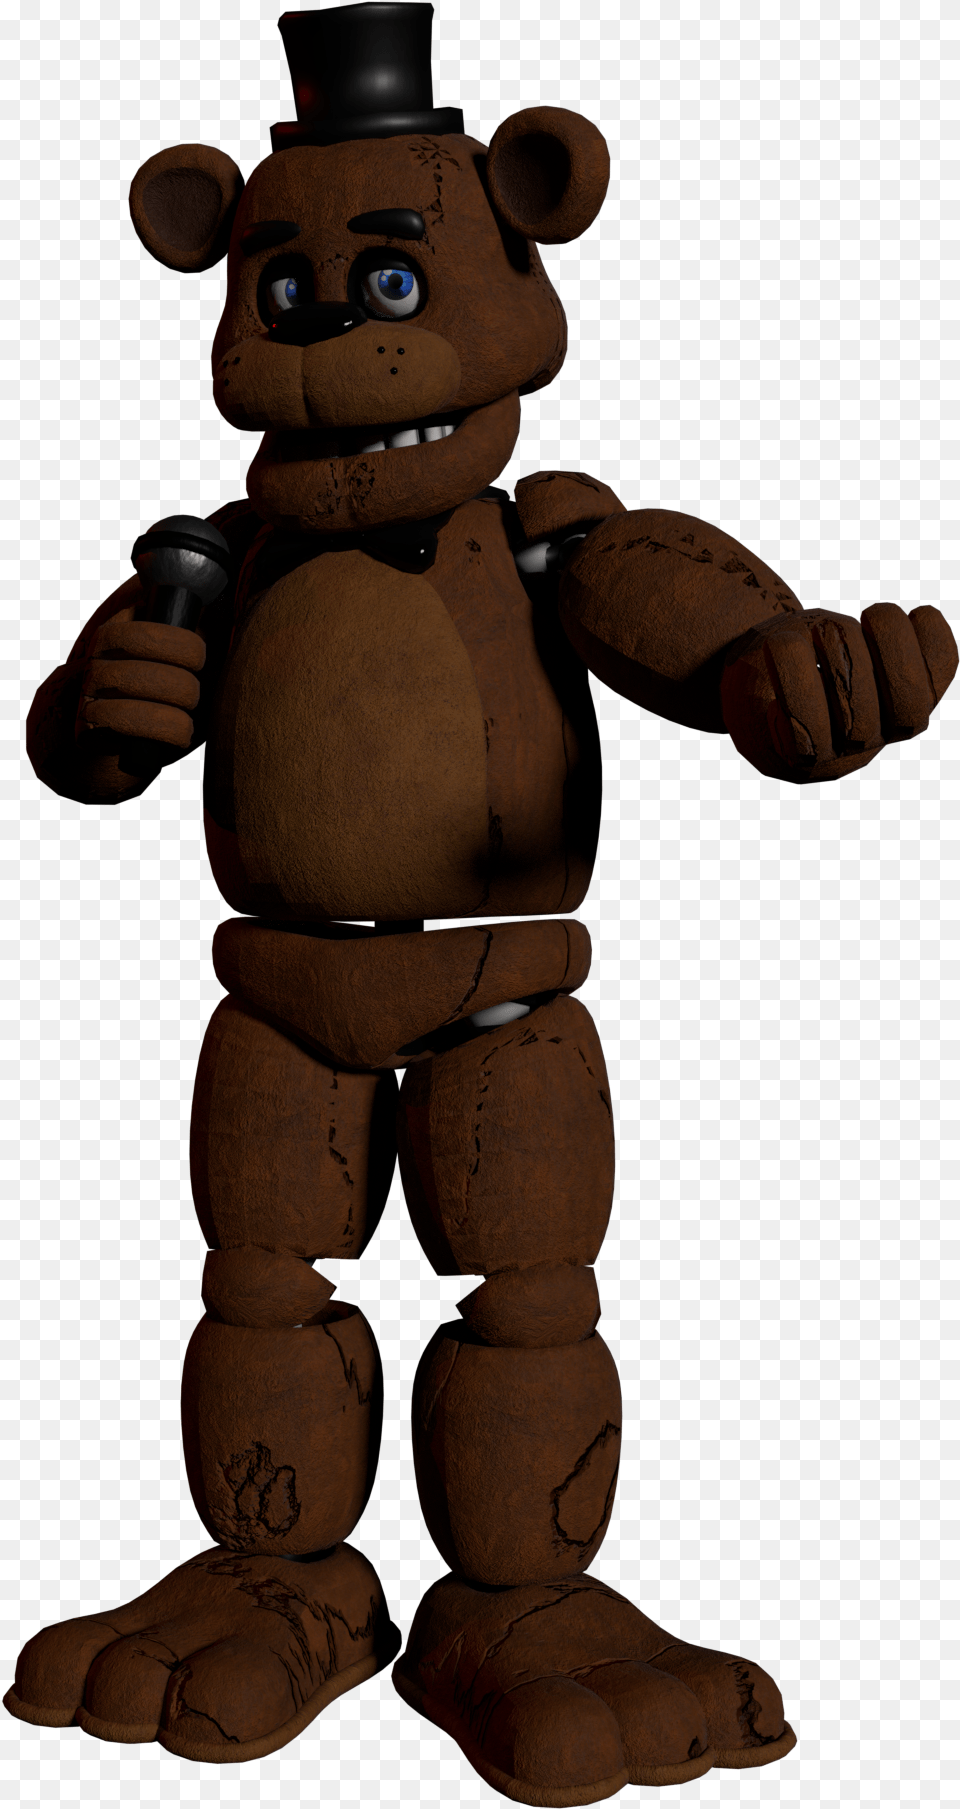 Imagetesting Five Nights At Freddy39s Render, Toy, Clothing, Glove, Figurine Free Png